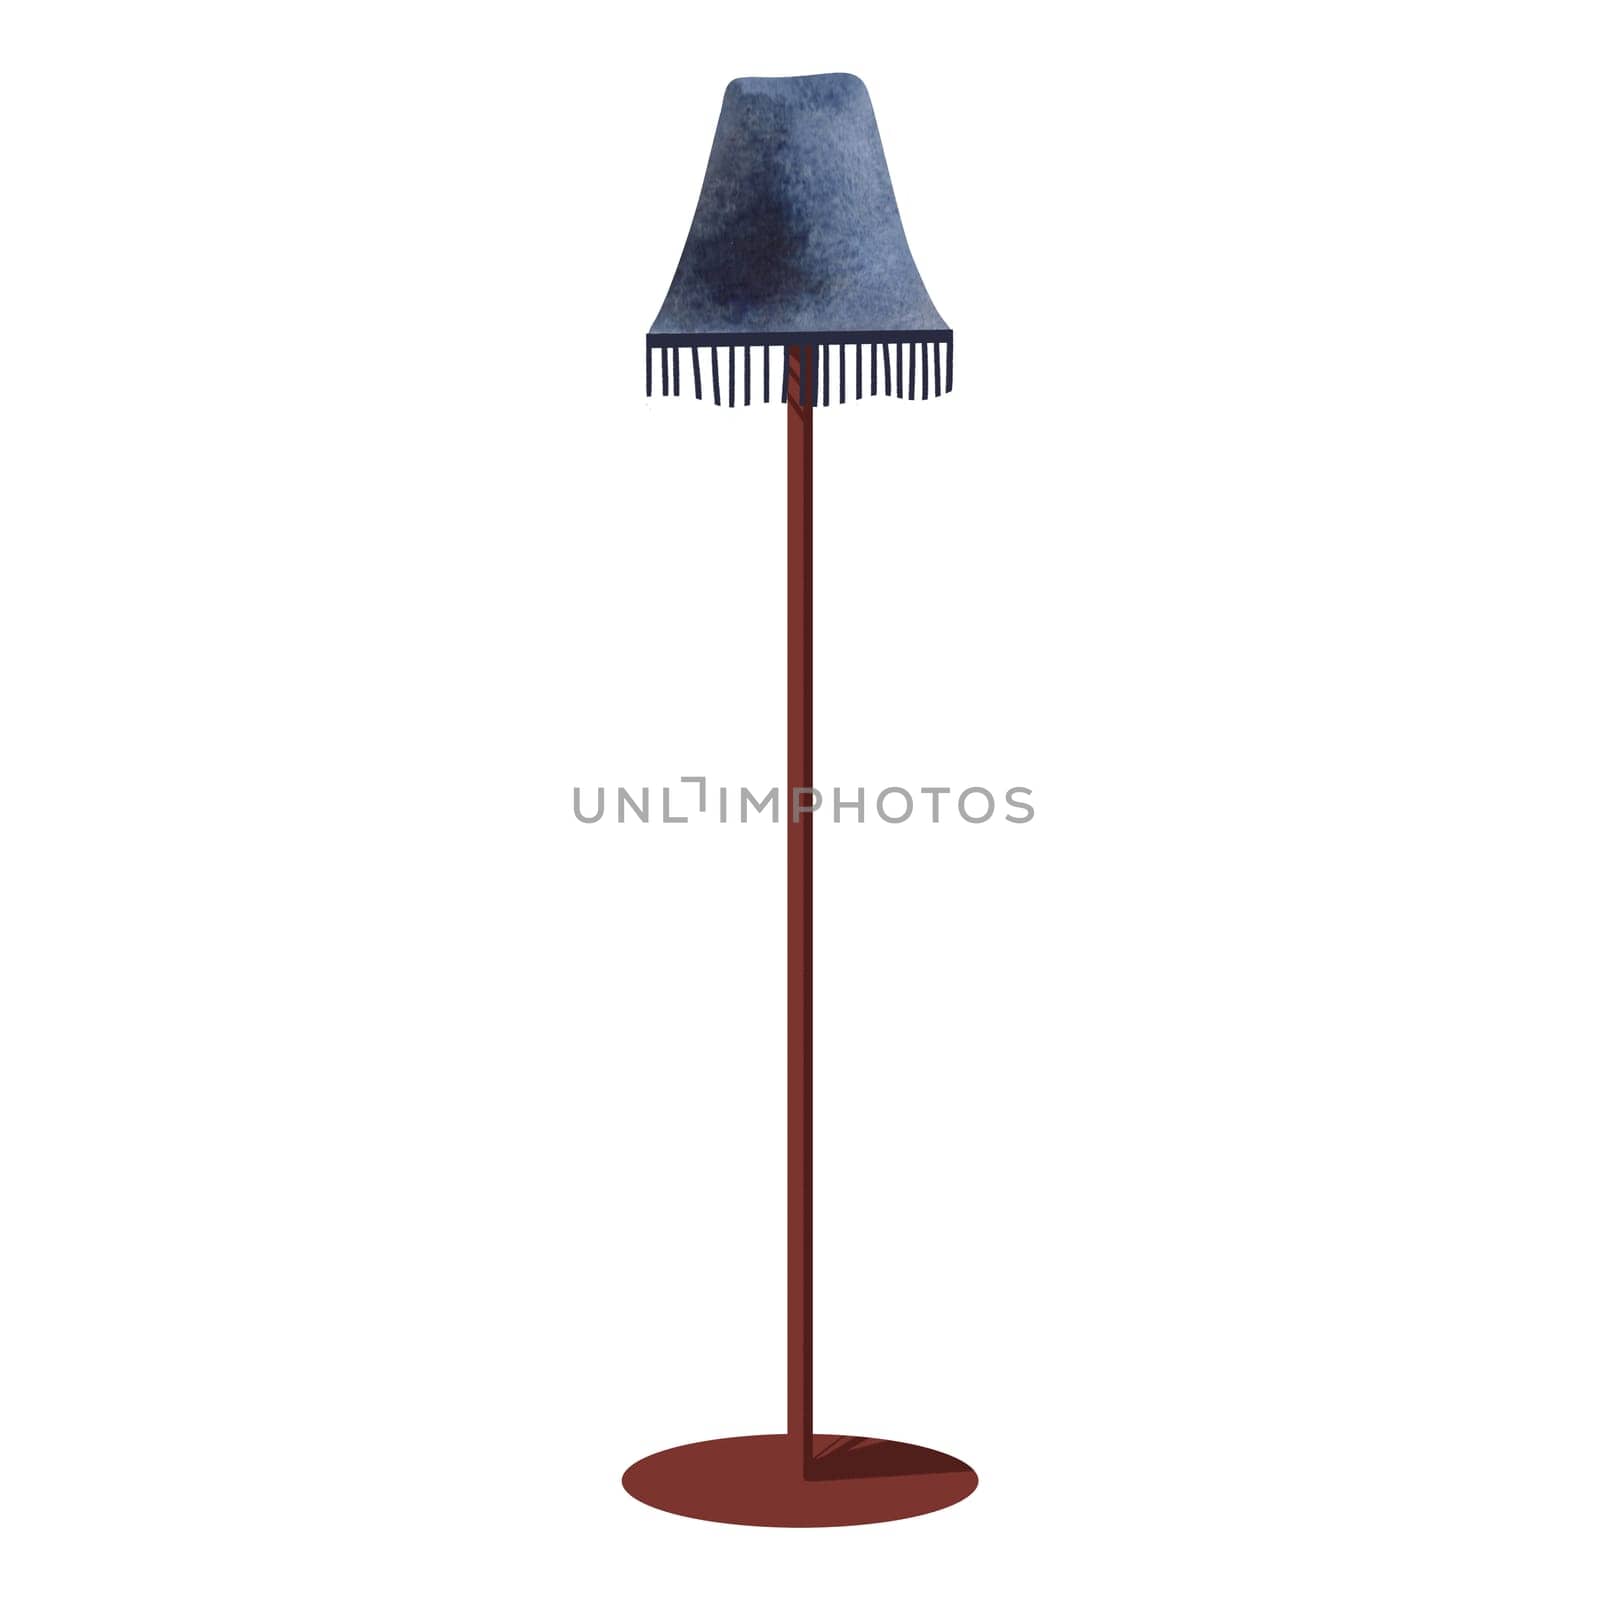 Floor lamp for reading. Furniture. Blank for interior design of a living room or library. Lamp, light source. Isolated watercolor illustration on white background. Clipart